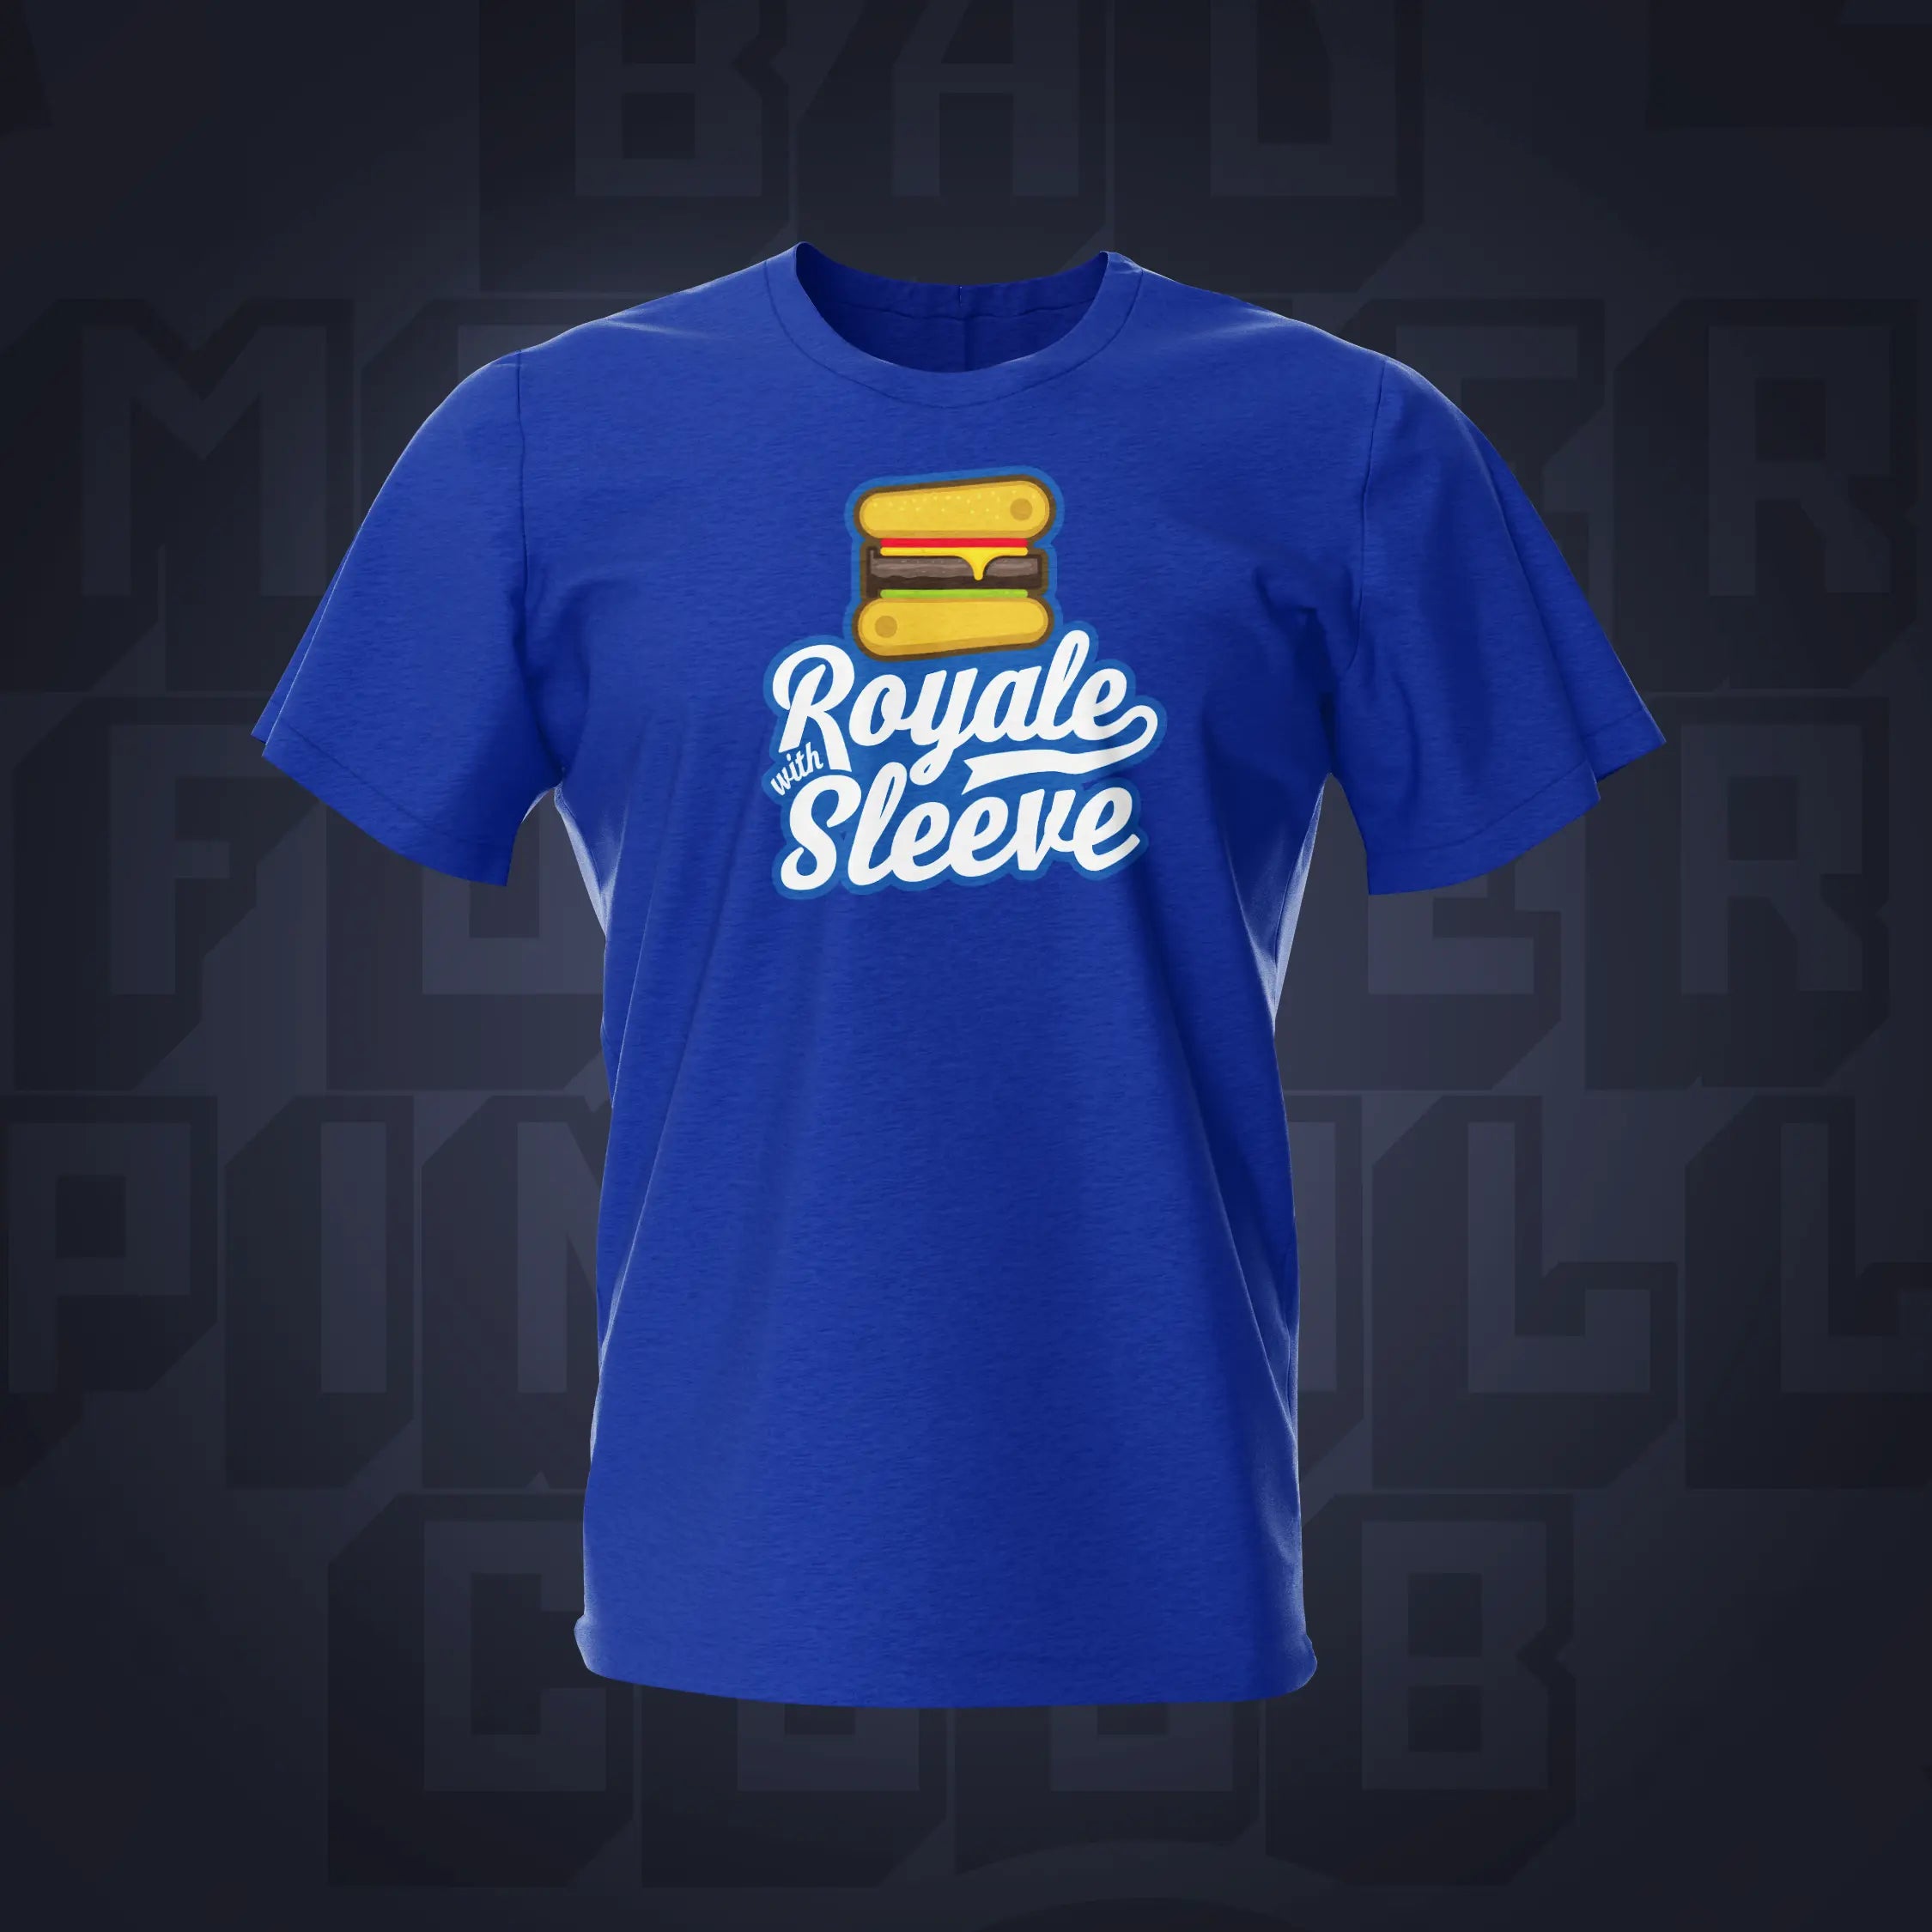 Royale with Sleeve Pinball T-Shirt